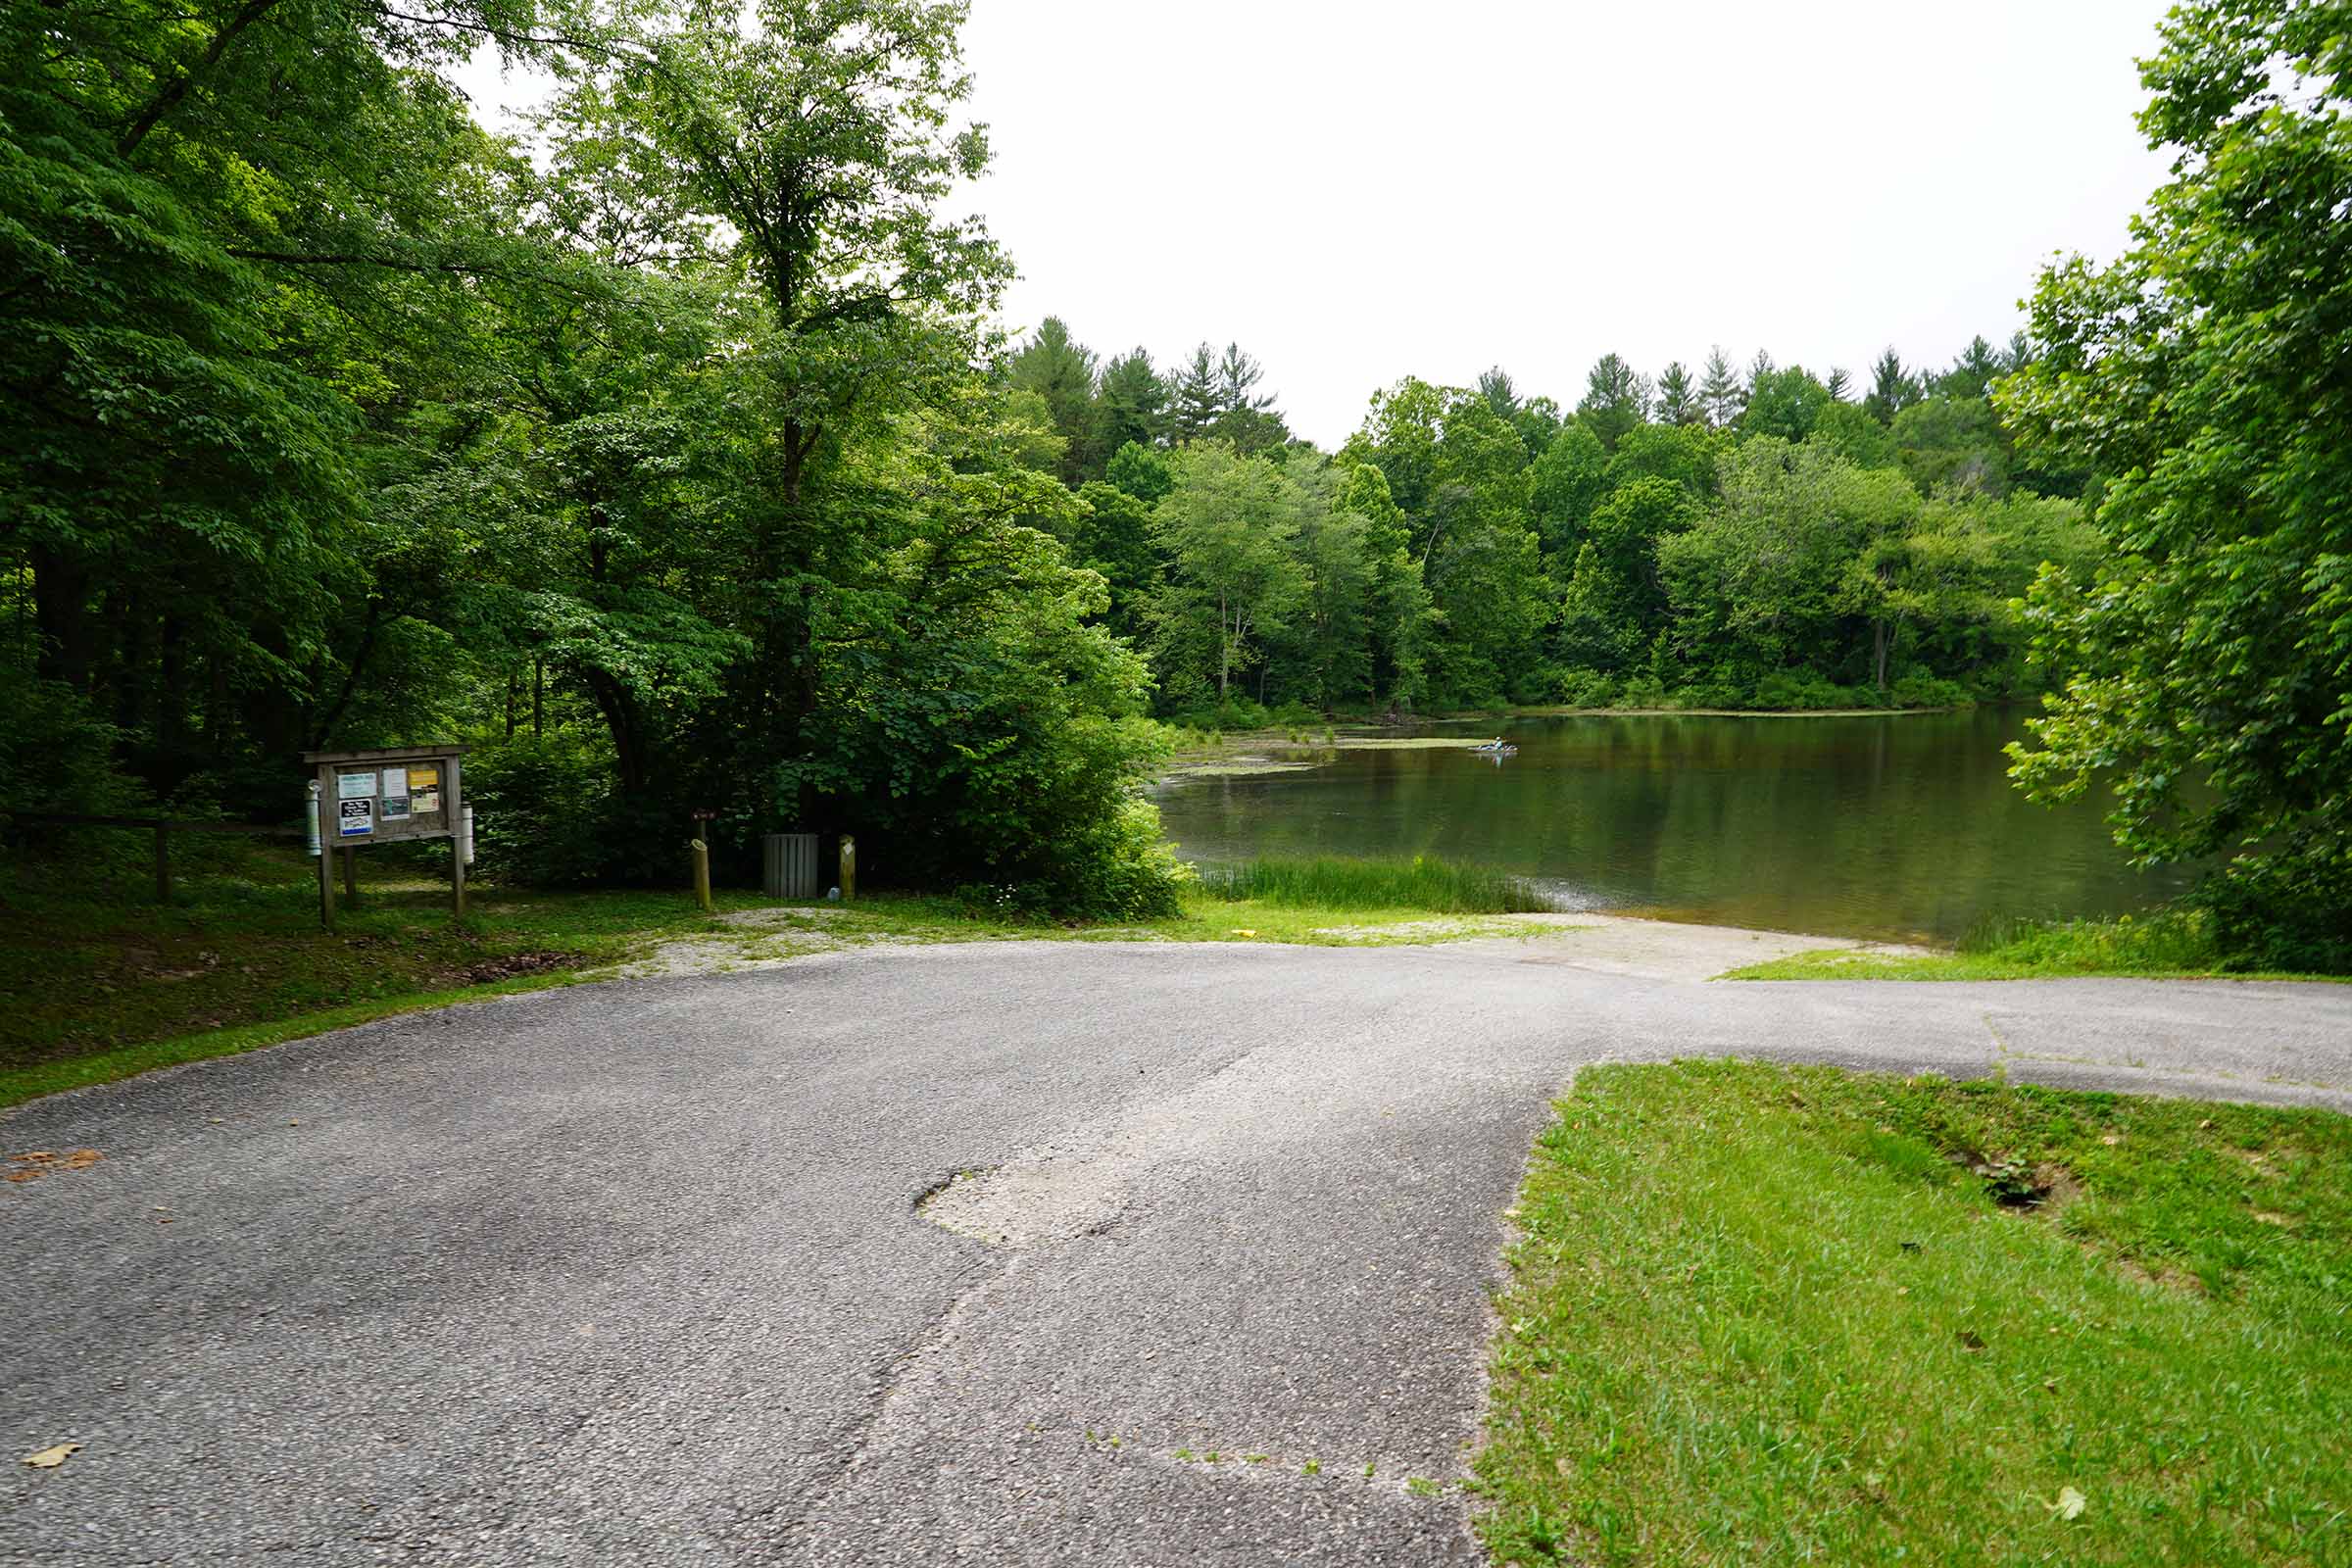 A paved boat ramp leads to a serene lake.